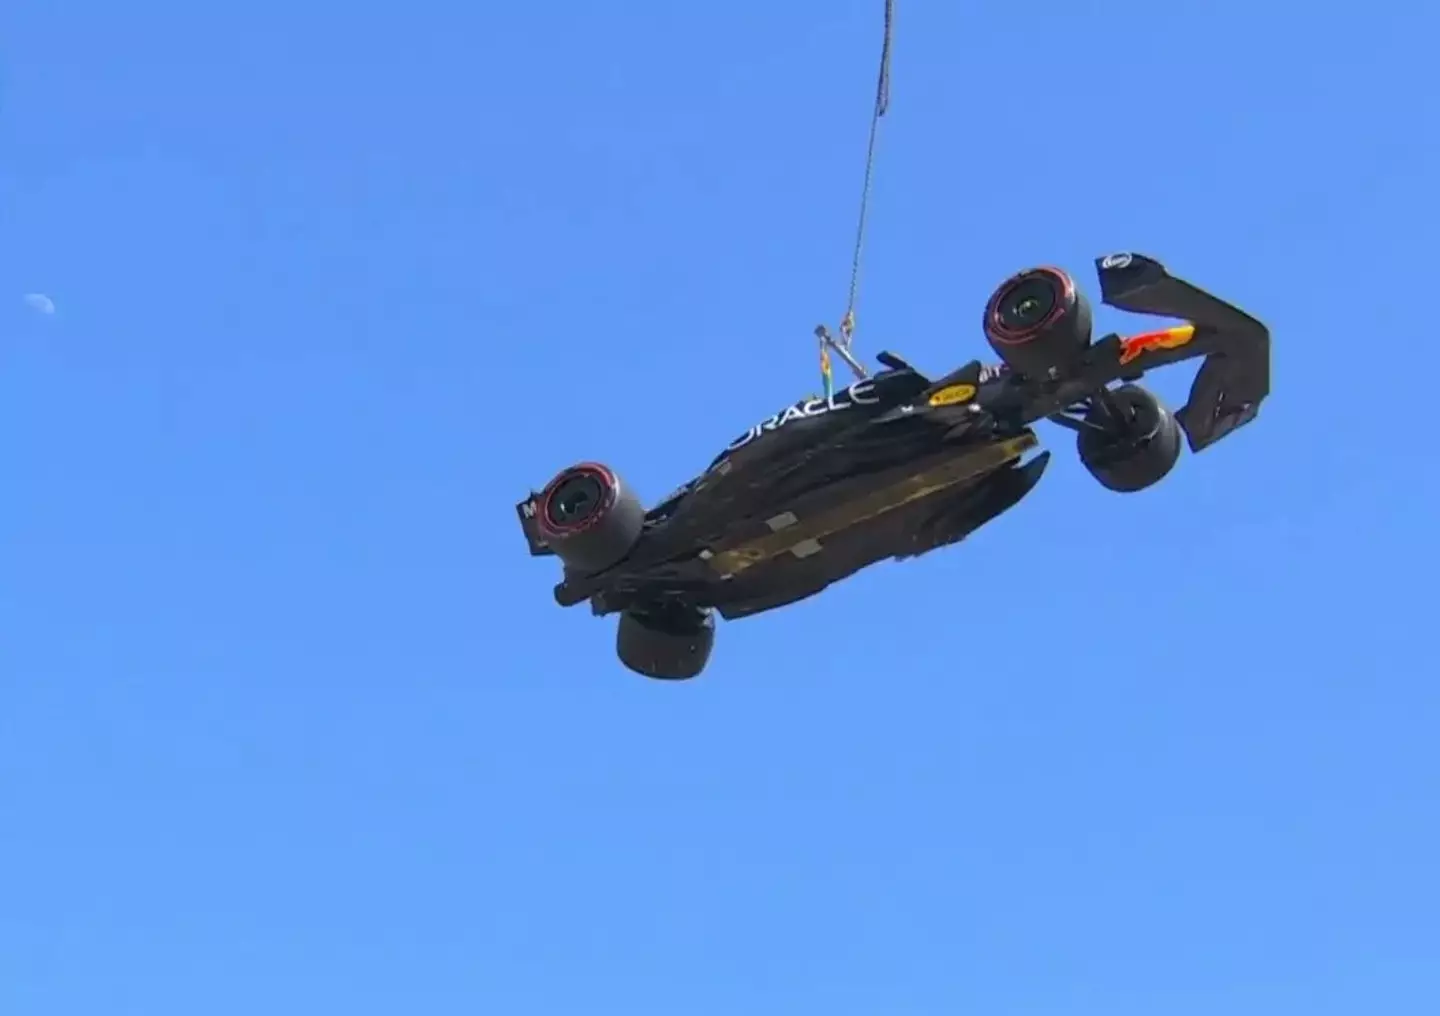 Sergio Perez has his car lifted away. Image: Twitter